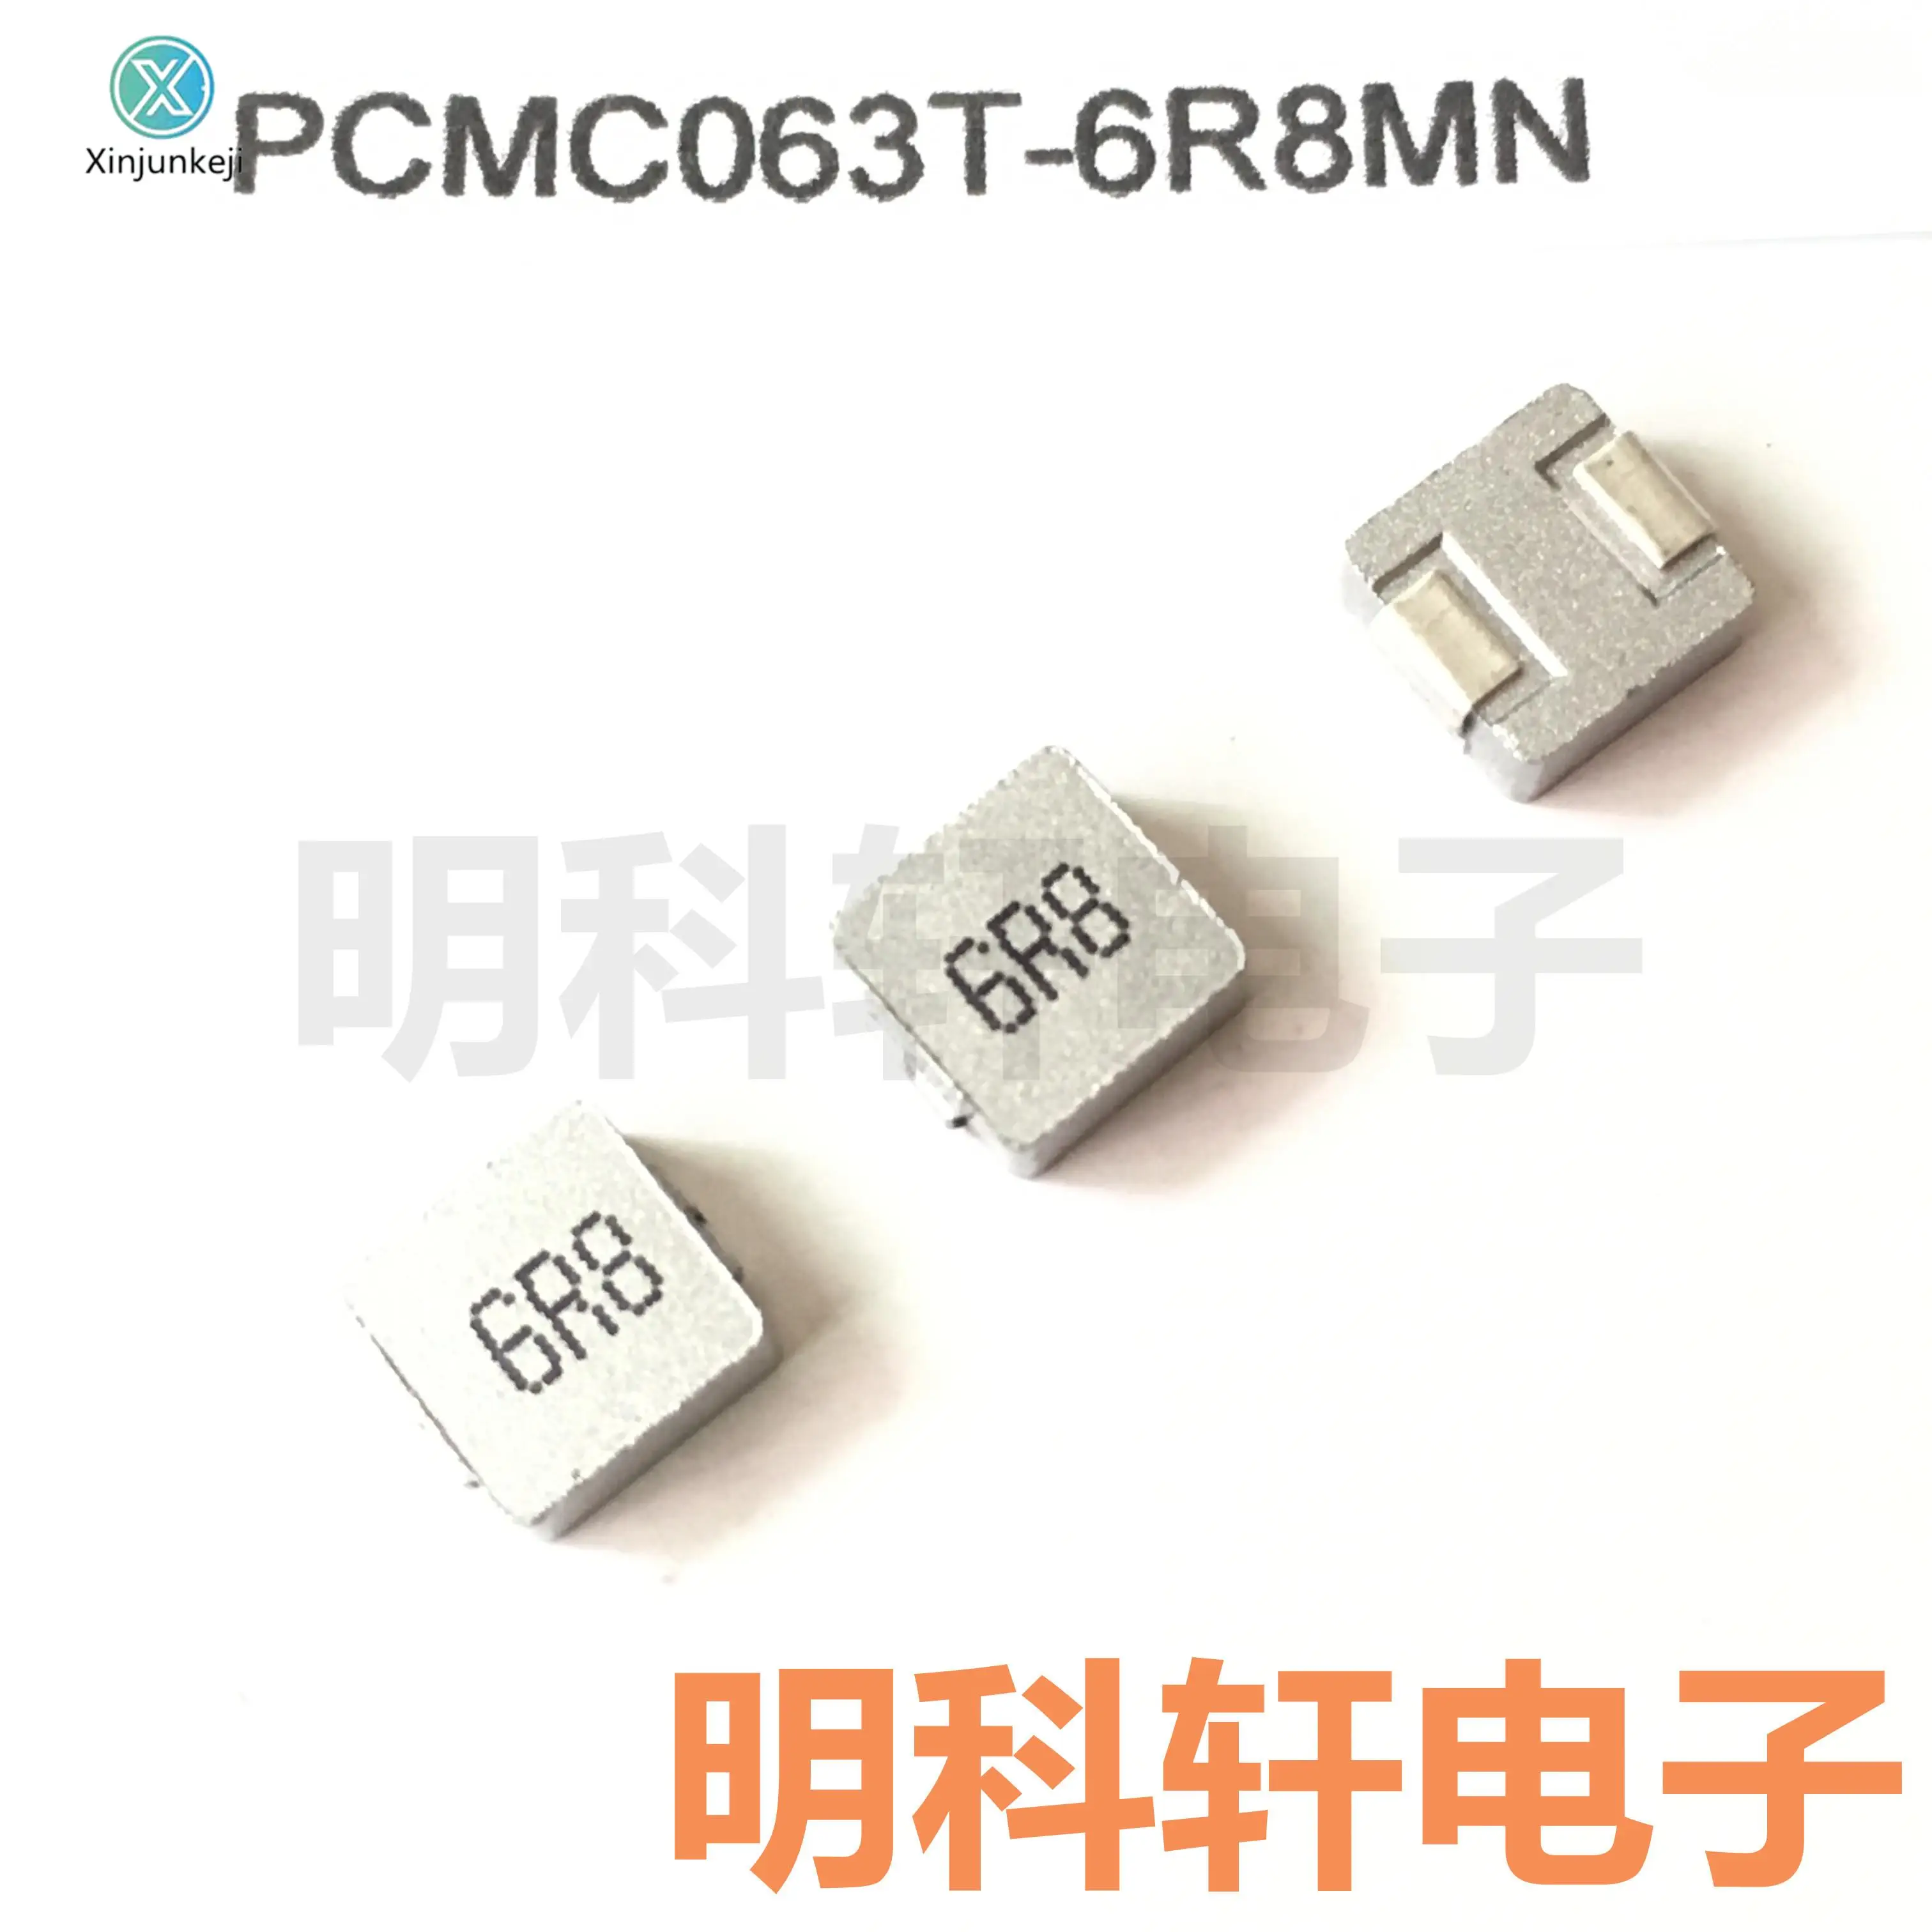 

20pcs orginal new PCMC063T-6R8MN SMD integrated molding inductor 7*7*3 6.8UH